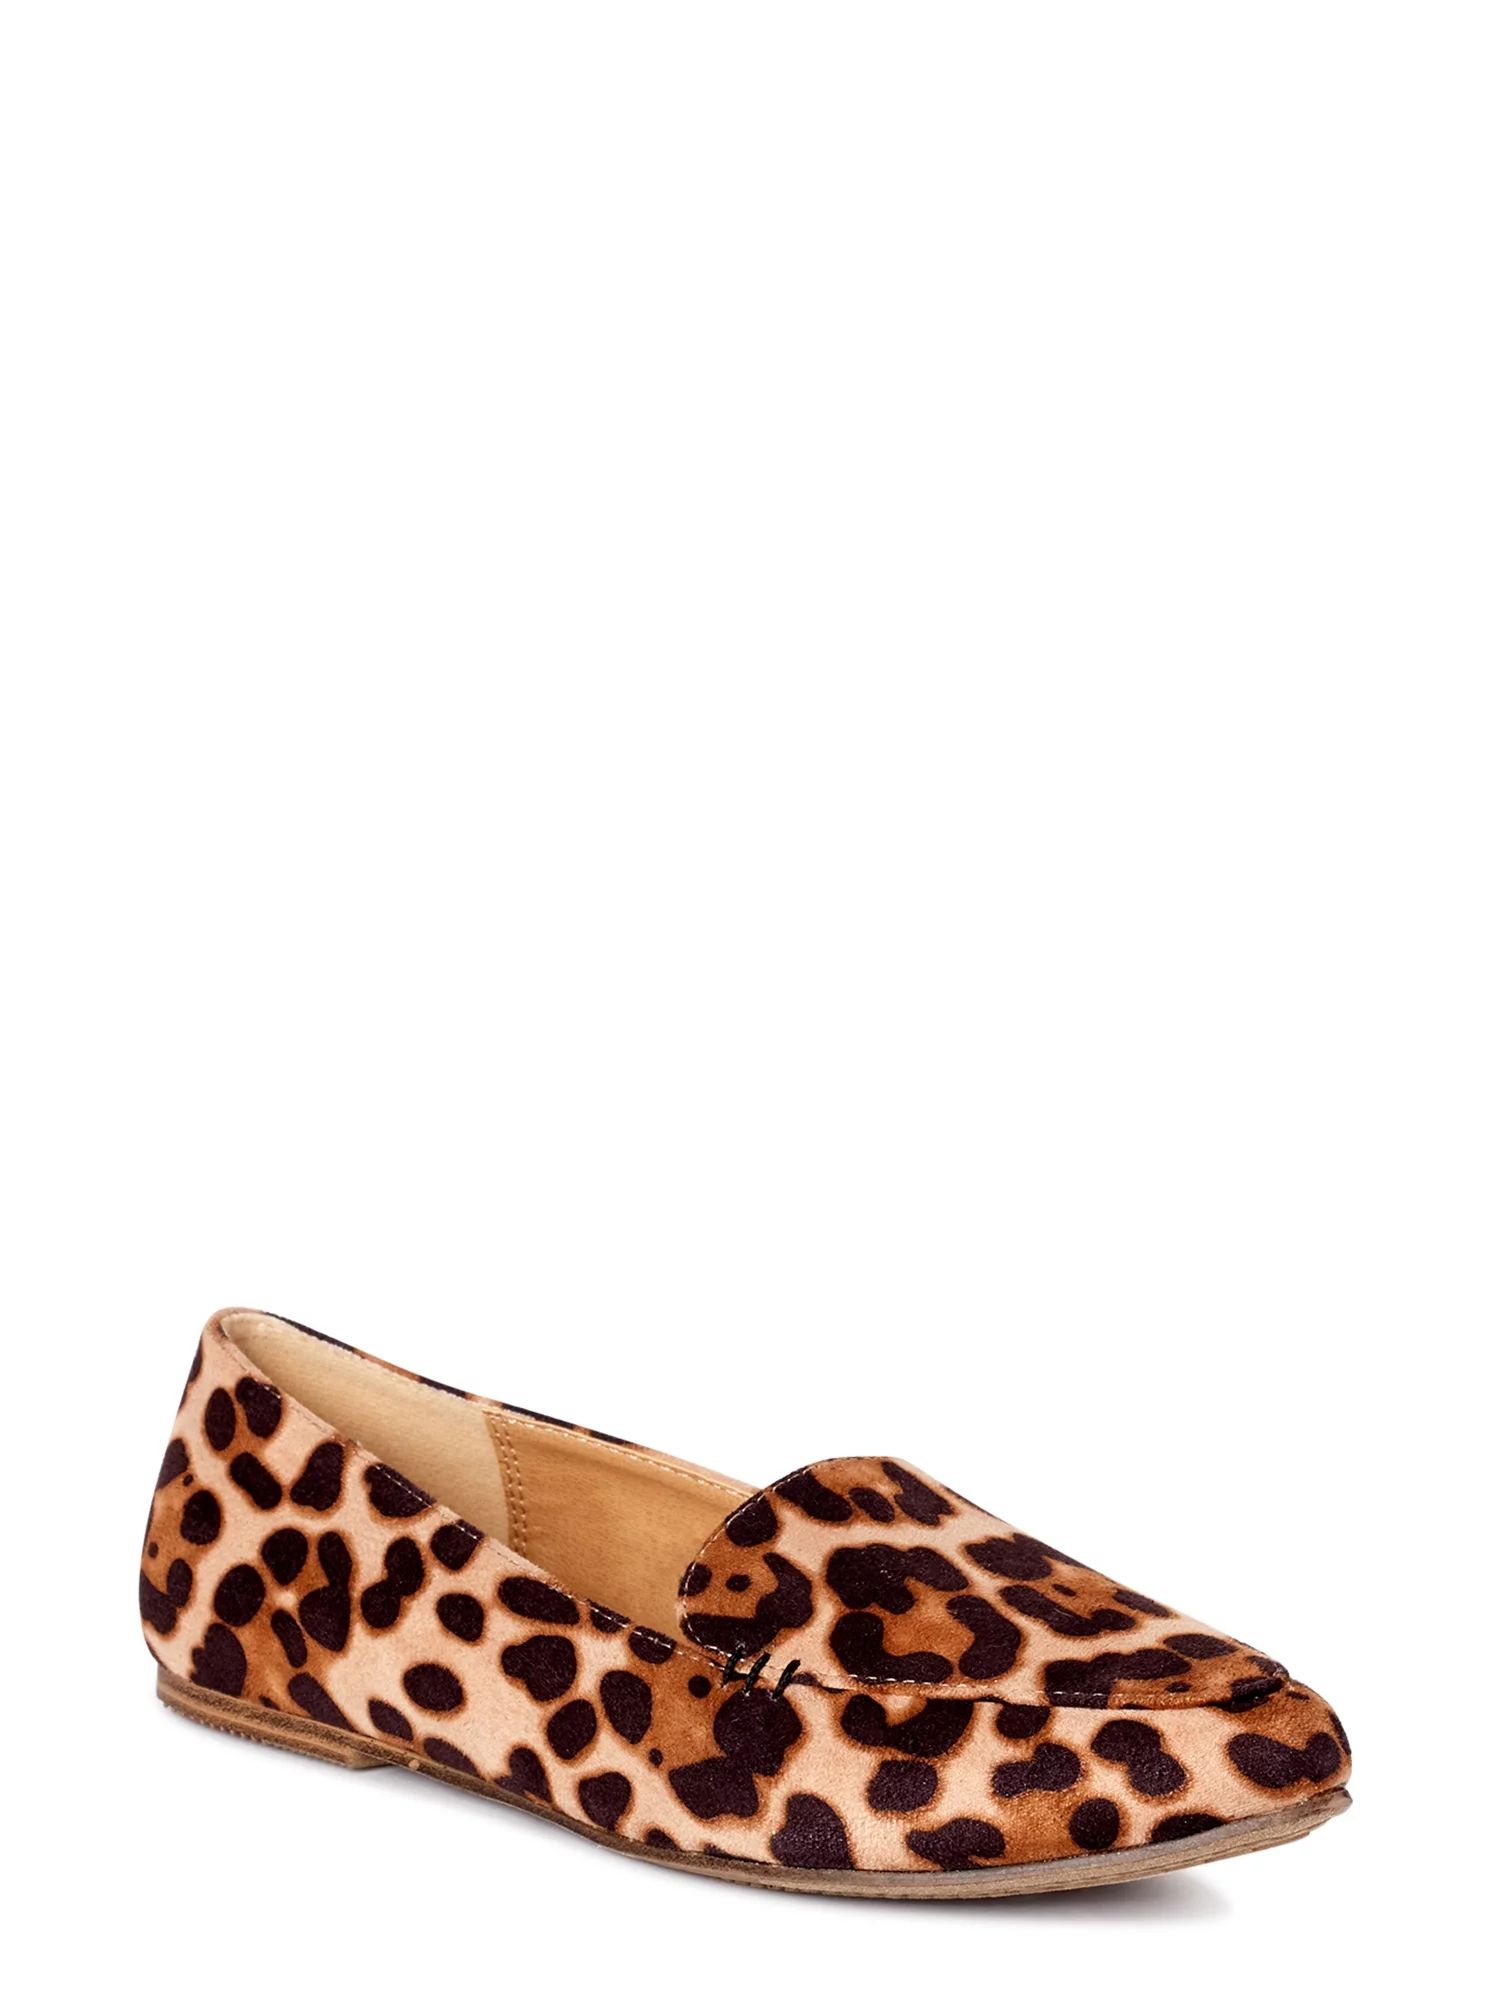 Time and Tru Women’s Animal Print Feather Flats, Available in Wide Width | Walmart (US)